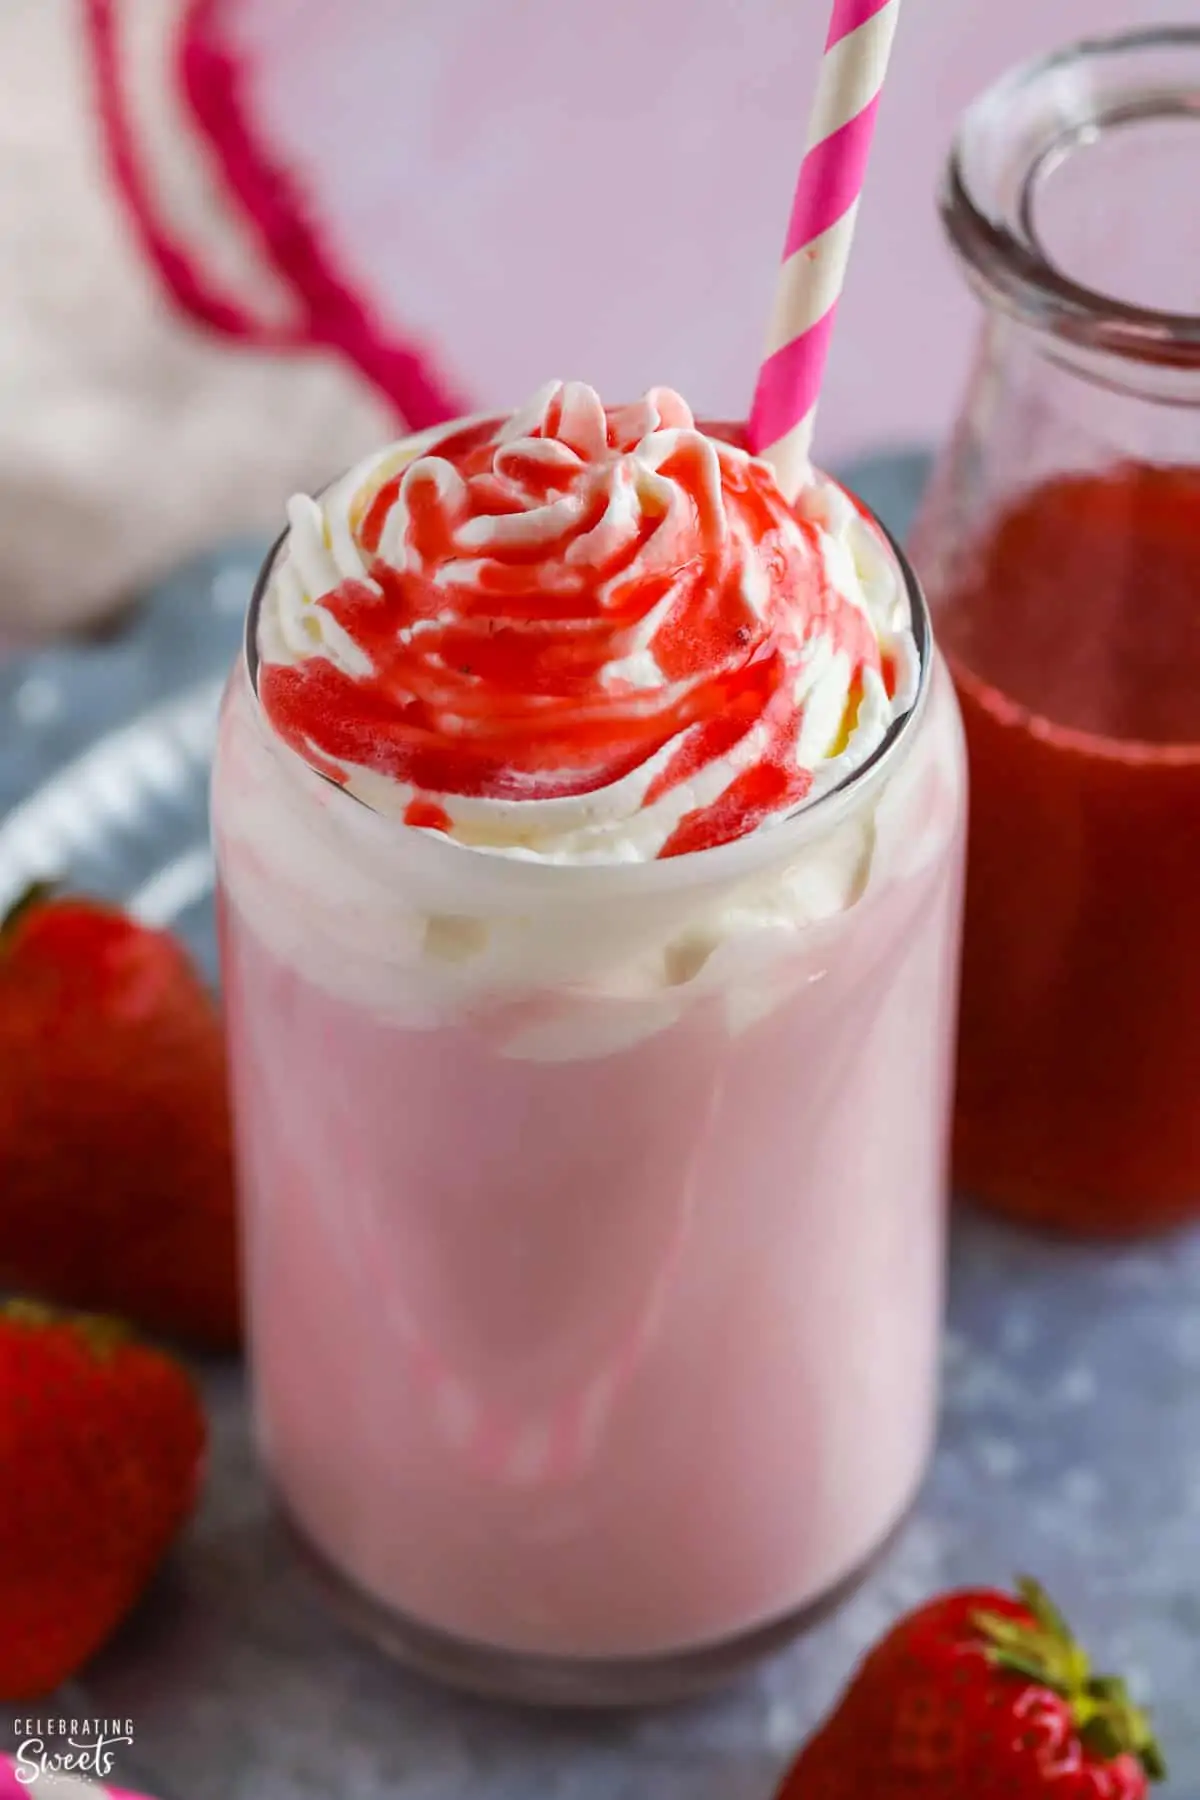 Glass of Strawberry Milk topped with whipped cream and strawberry syrup.